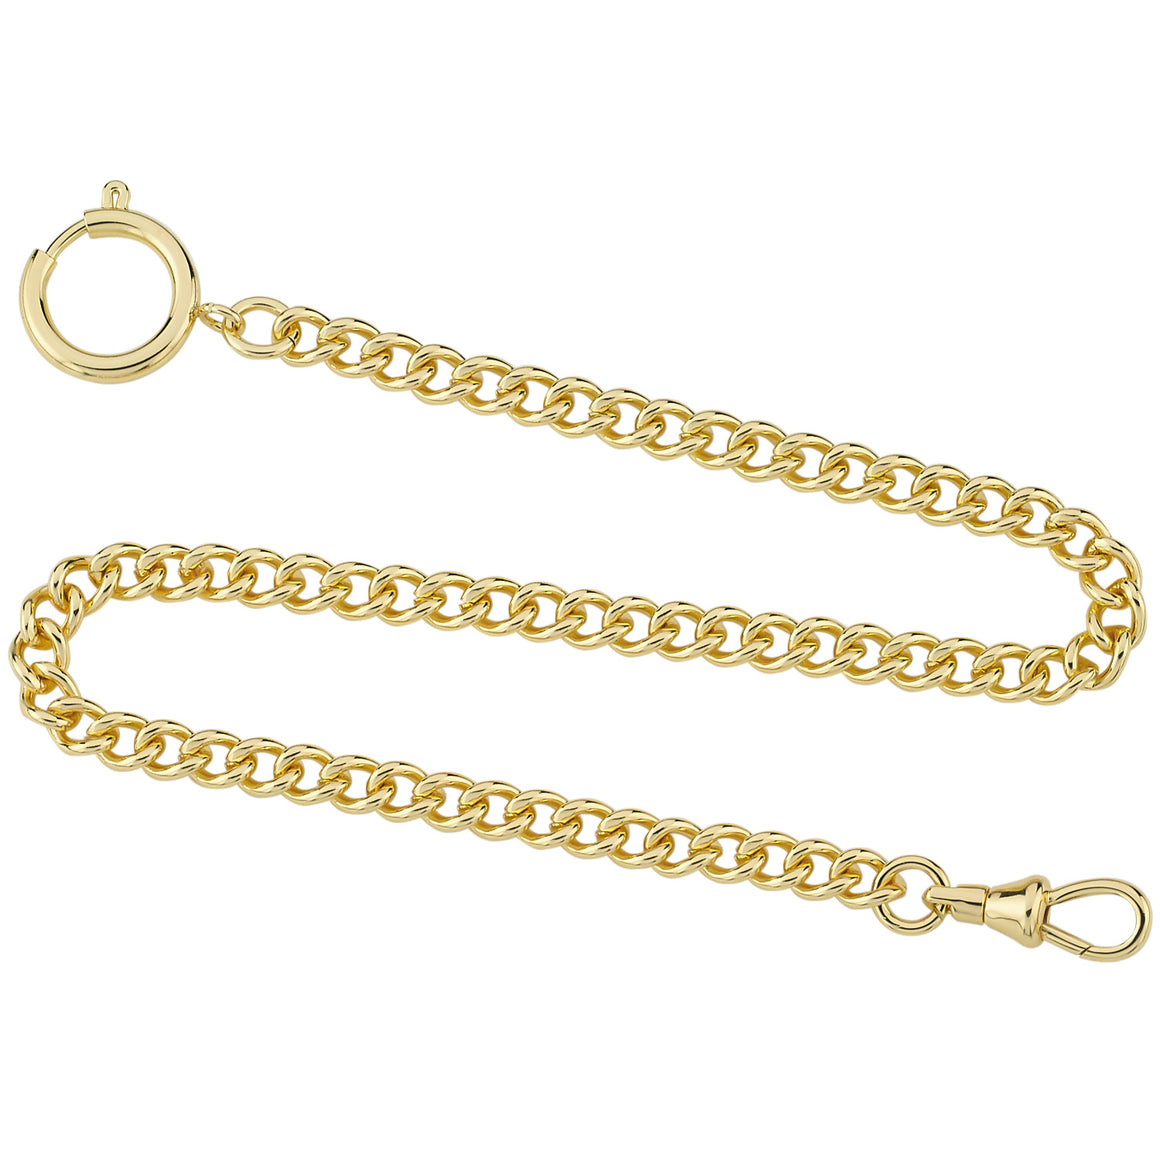 Gotham Gold-Plated Stainless Steel Pocket Watch Chain Fob Curb Link 14" # GWCGTLCHAIN